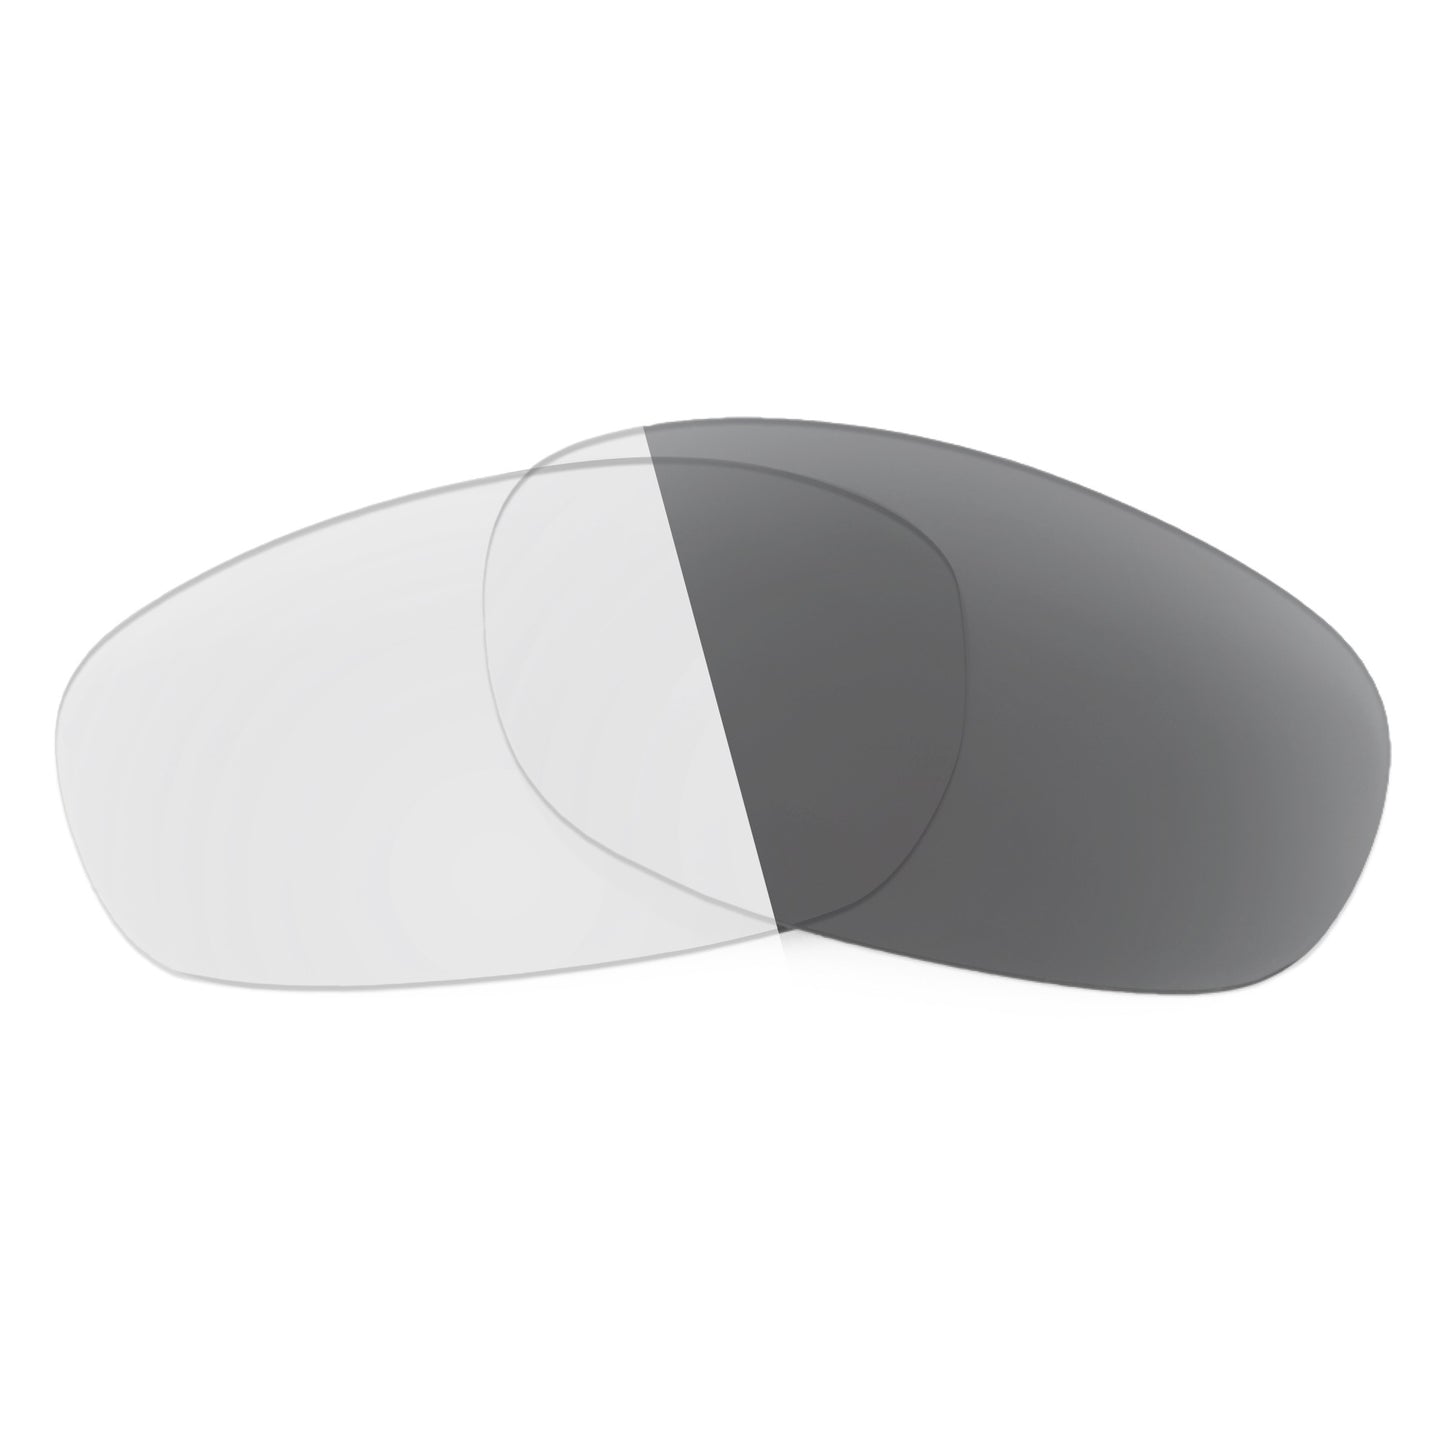 Revant replacement lenses for Ray-Ban RB3529 58mm Non-Polarized Adapt Gray Photochromic